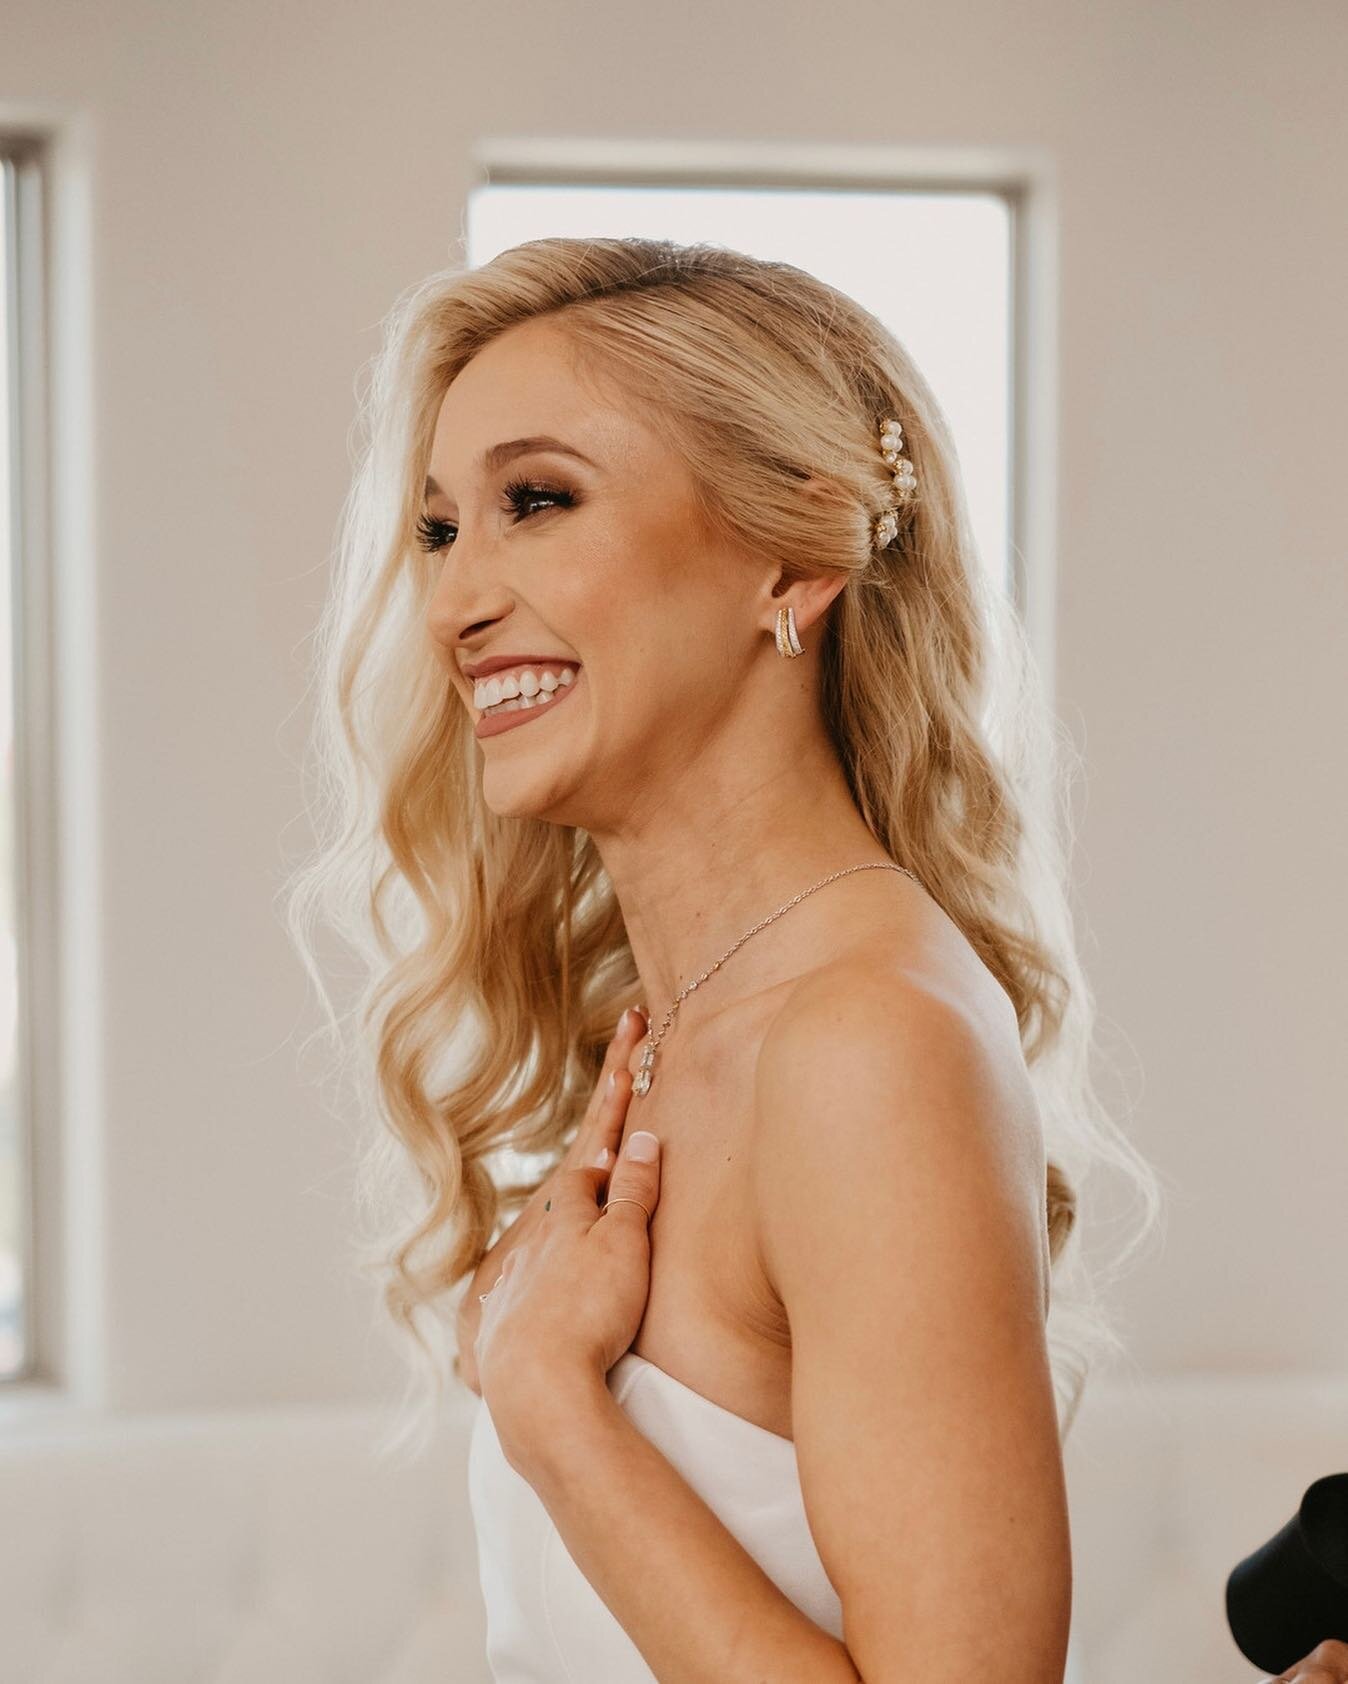 A smile so big it&rsquo;s contagious! This glowing bride was thrilled after seeing her hair and makeup on this special day! We love getting to play a small role on your special day 🤍